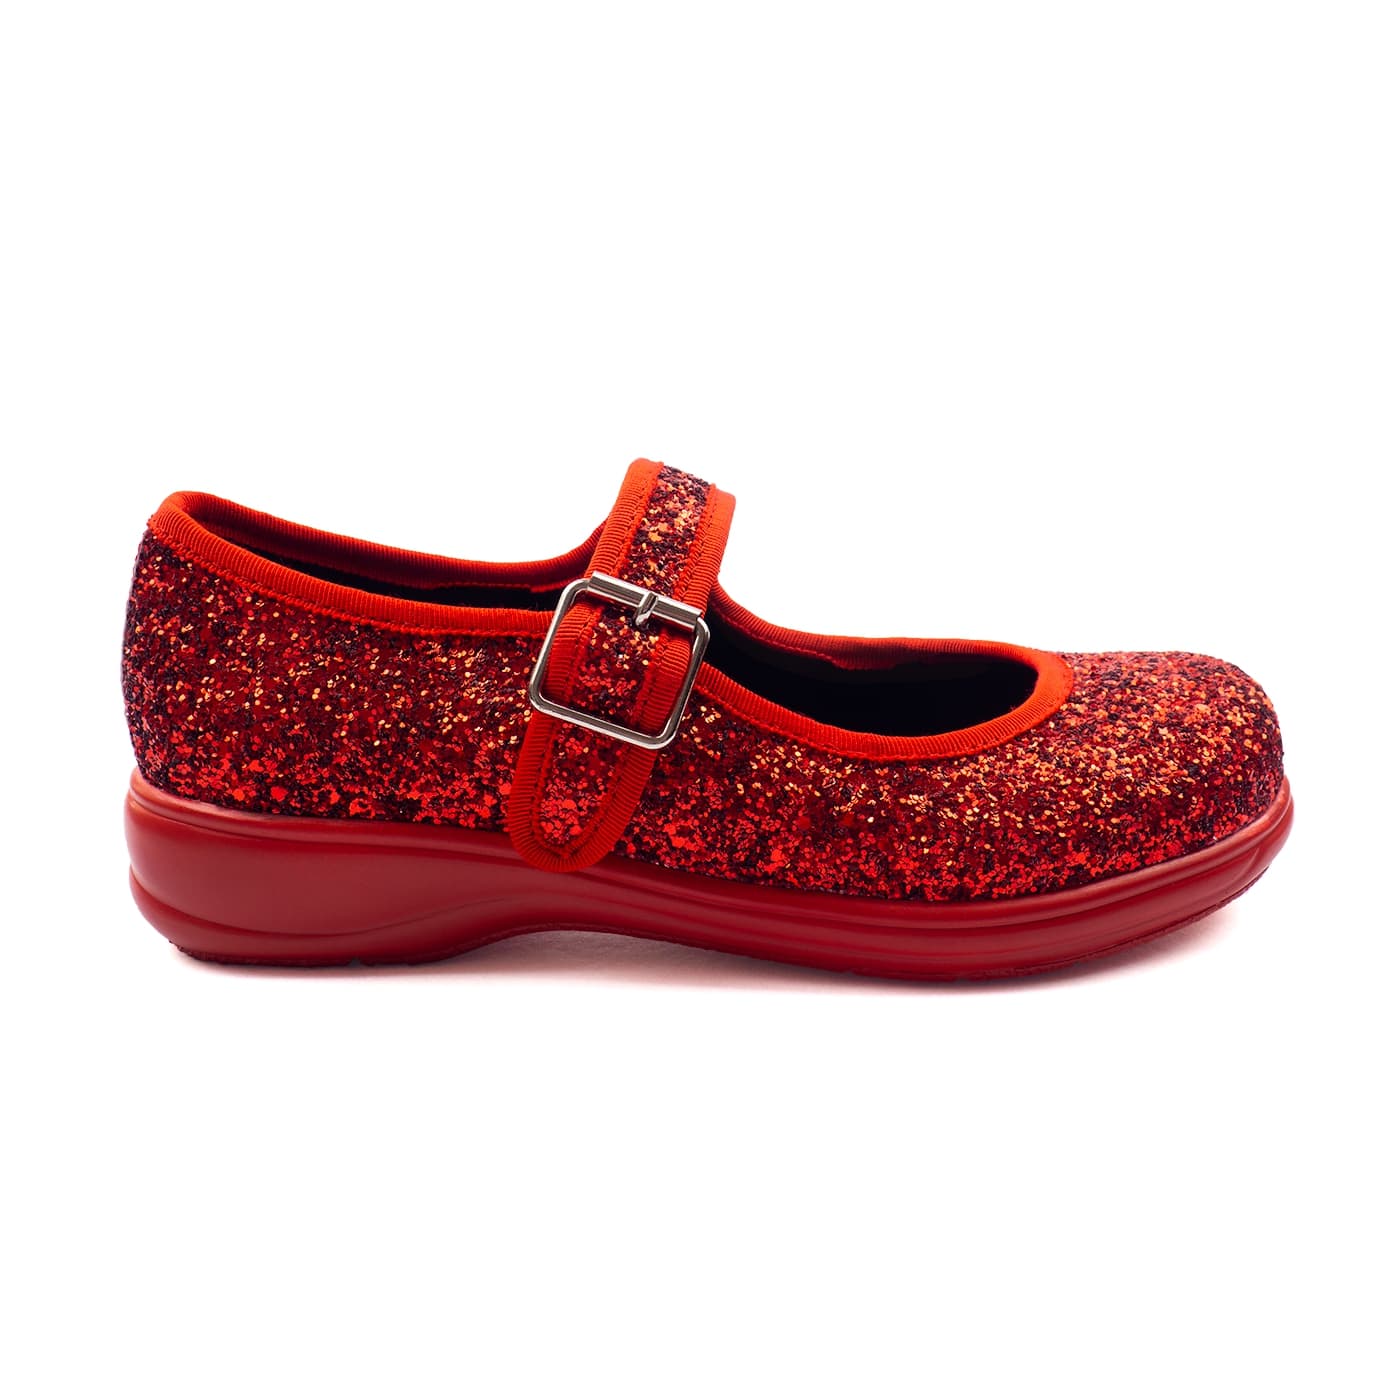 Dorothy Mary Janes by RainbowsAndFairies.com (Red Glitter - Wizard Of Oz - Kansas - Ruby Slippers - Dorothy Shoes) - SKU: FW_MARYJ_DRTHY_ORG - Pic 04